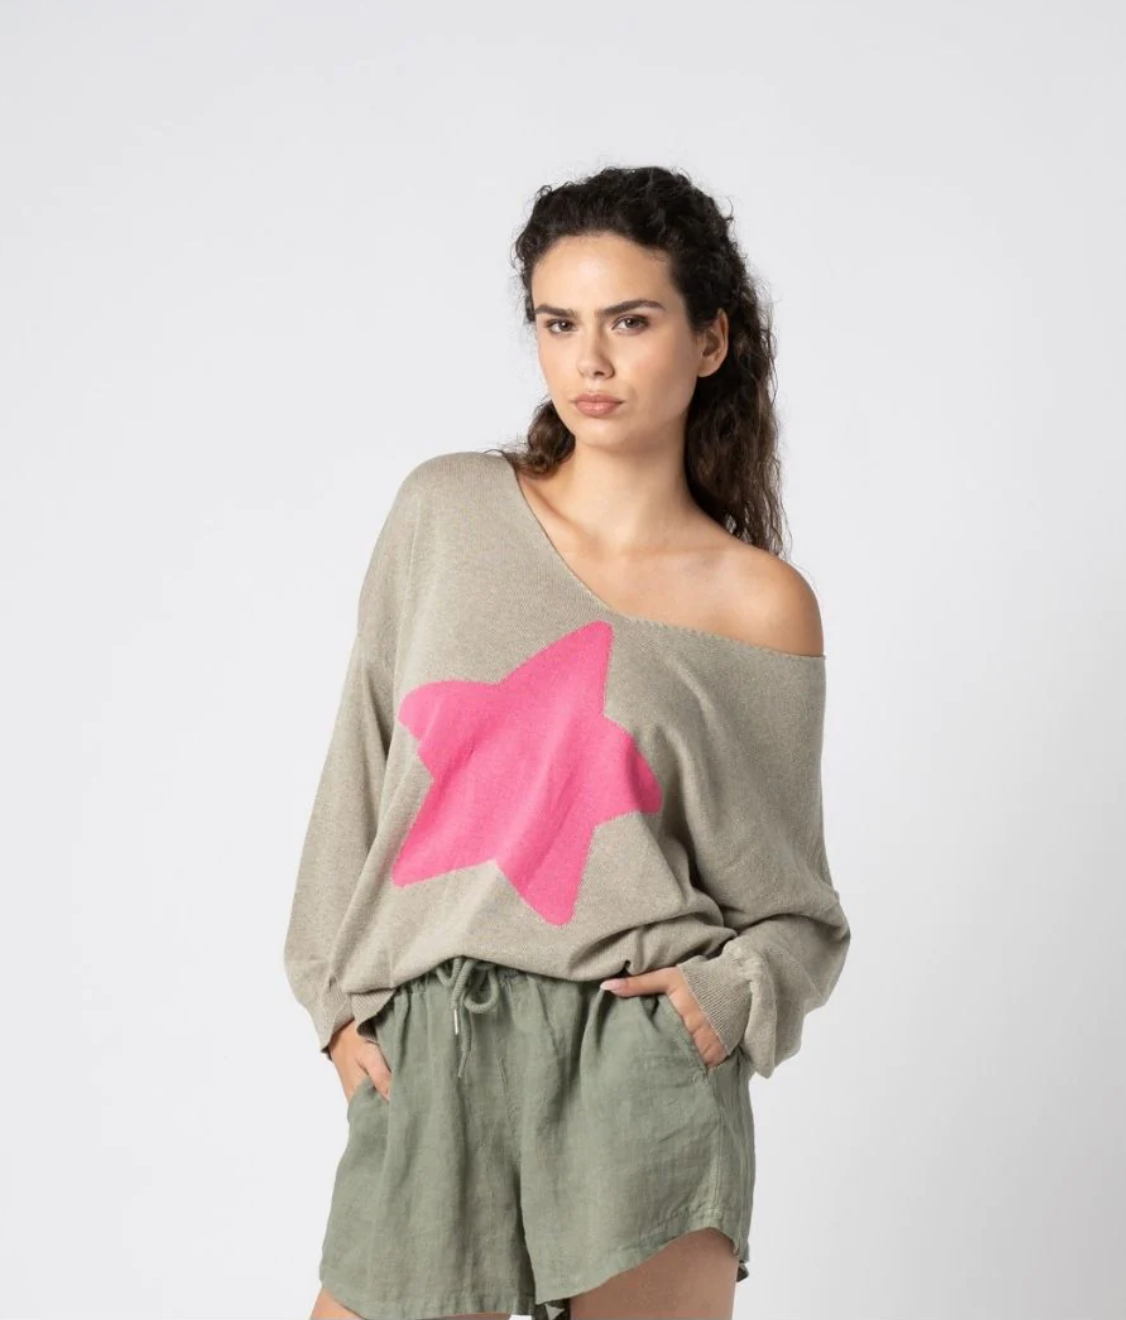 Astrid Italy North Star Knit Sweater in Cargo - Jaunts Boutique 